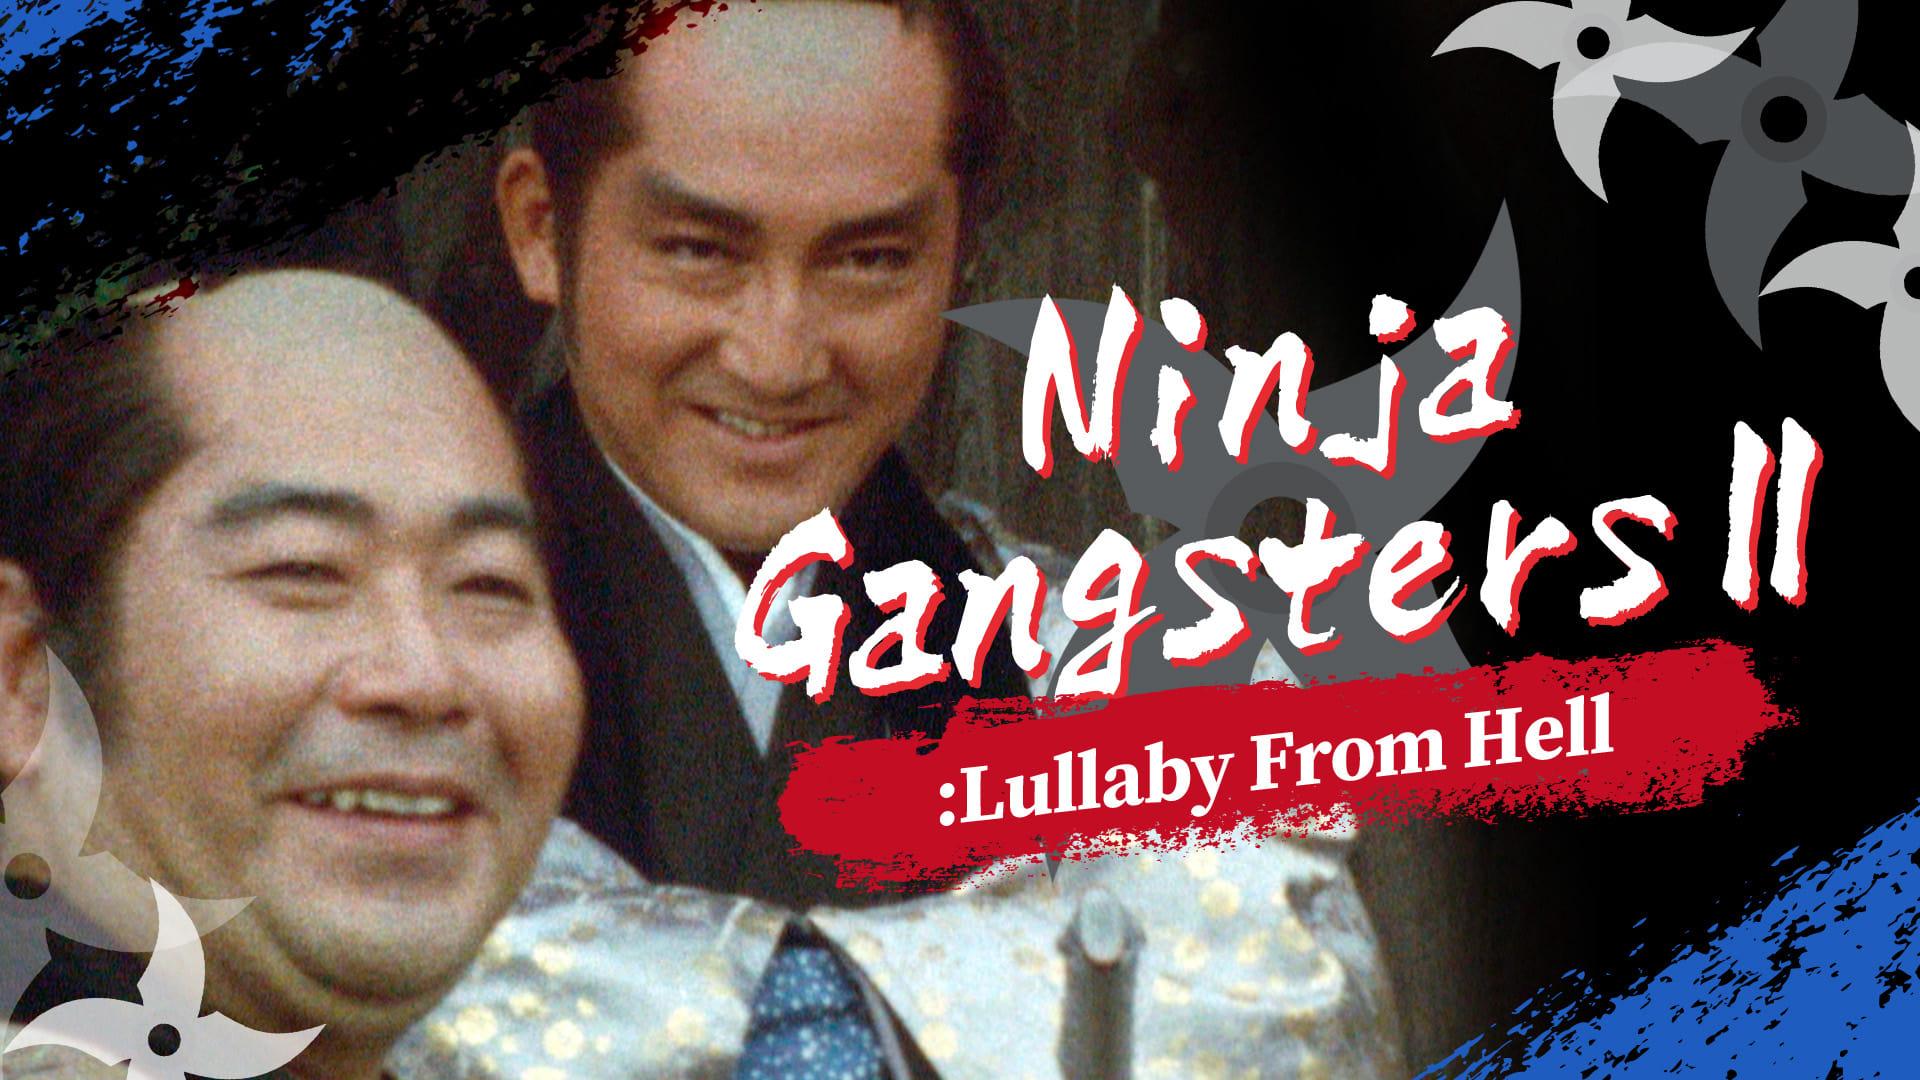 Ninja Gangsters 2: The Lullaby of Hell backdrop